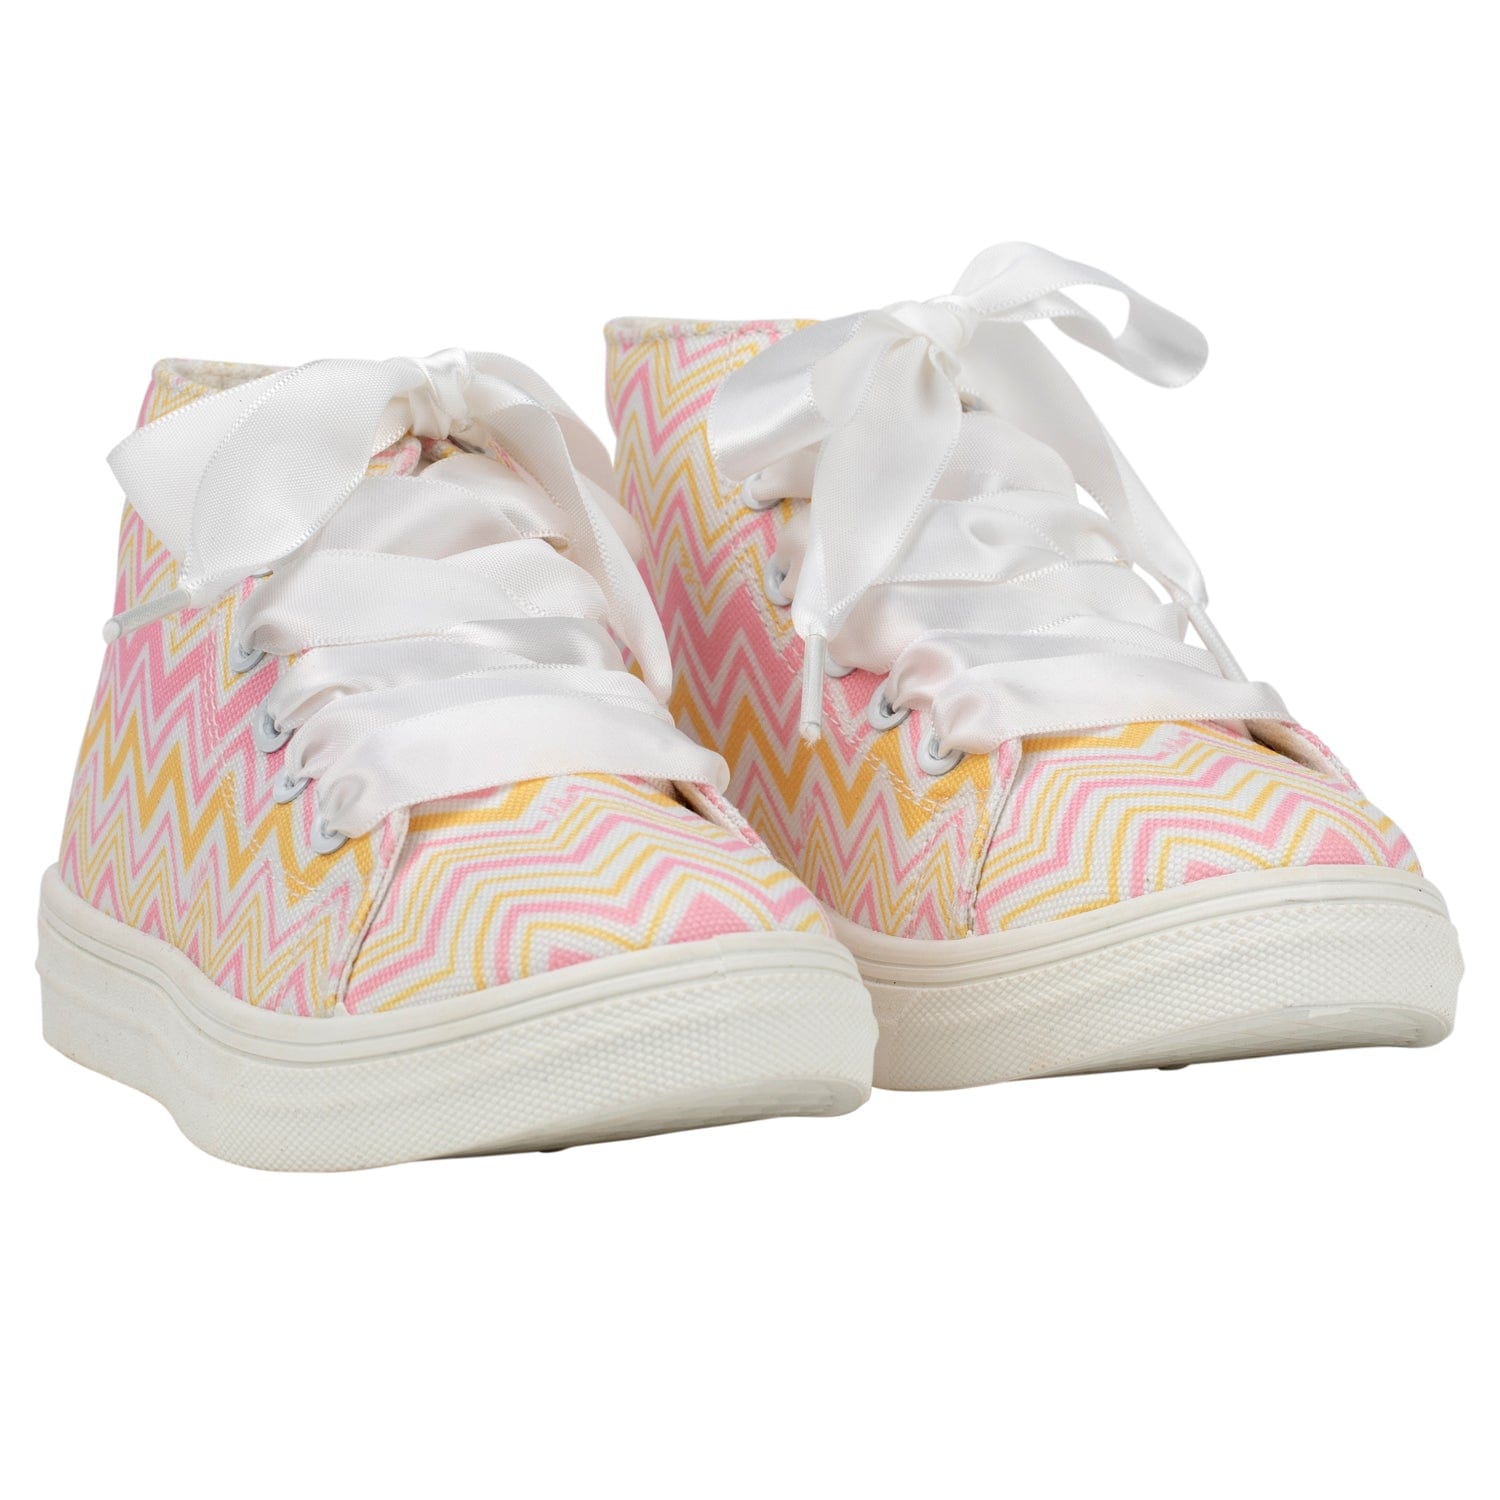 A DEE - Jazzy Chic Chevron Printed Canvas High Top - Pink